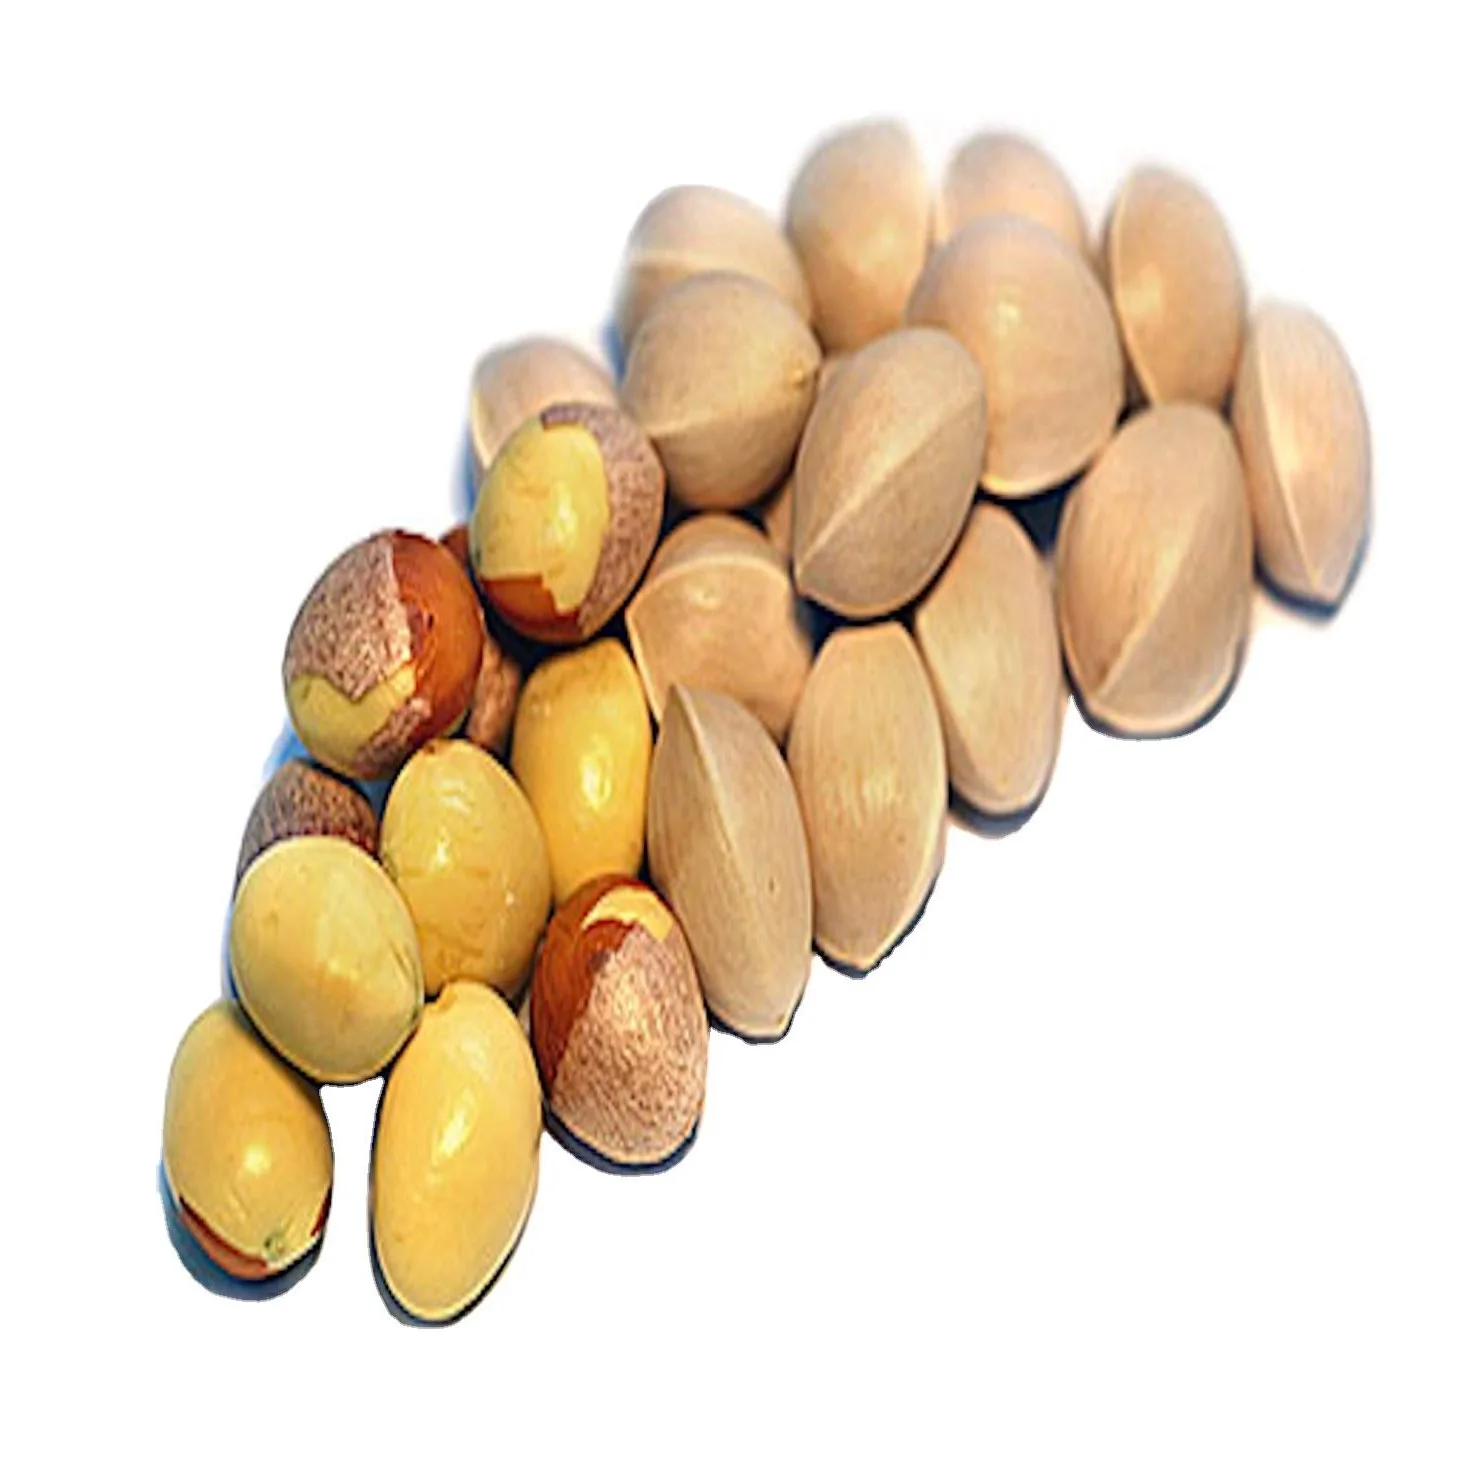 Wholesale Supplier Of Cheapest Price Organic Dried GINKGO NUTS